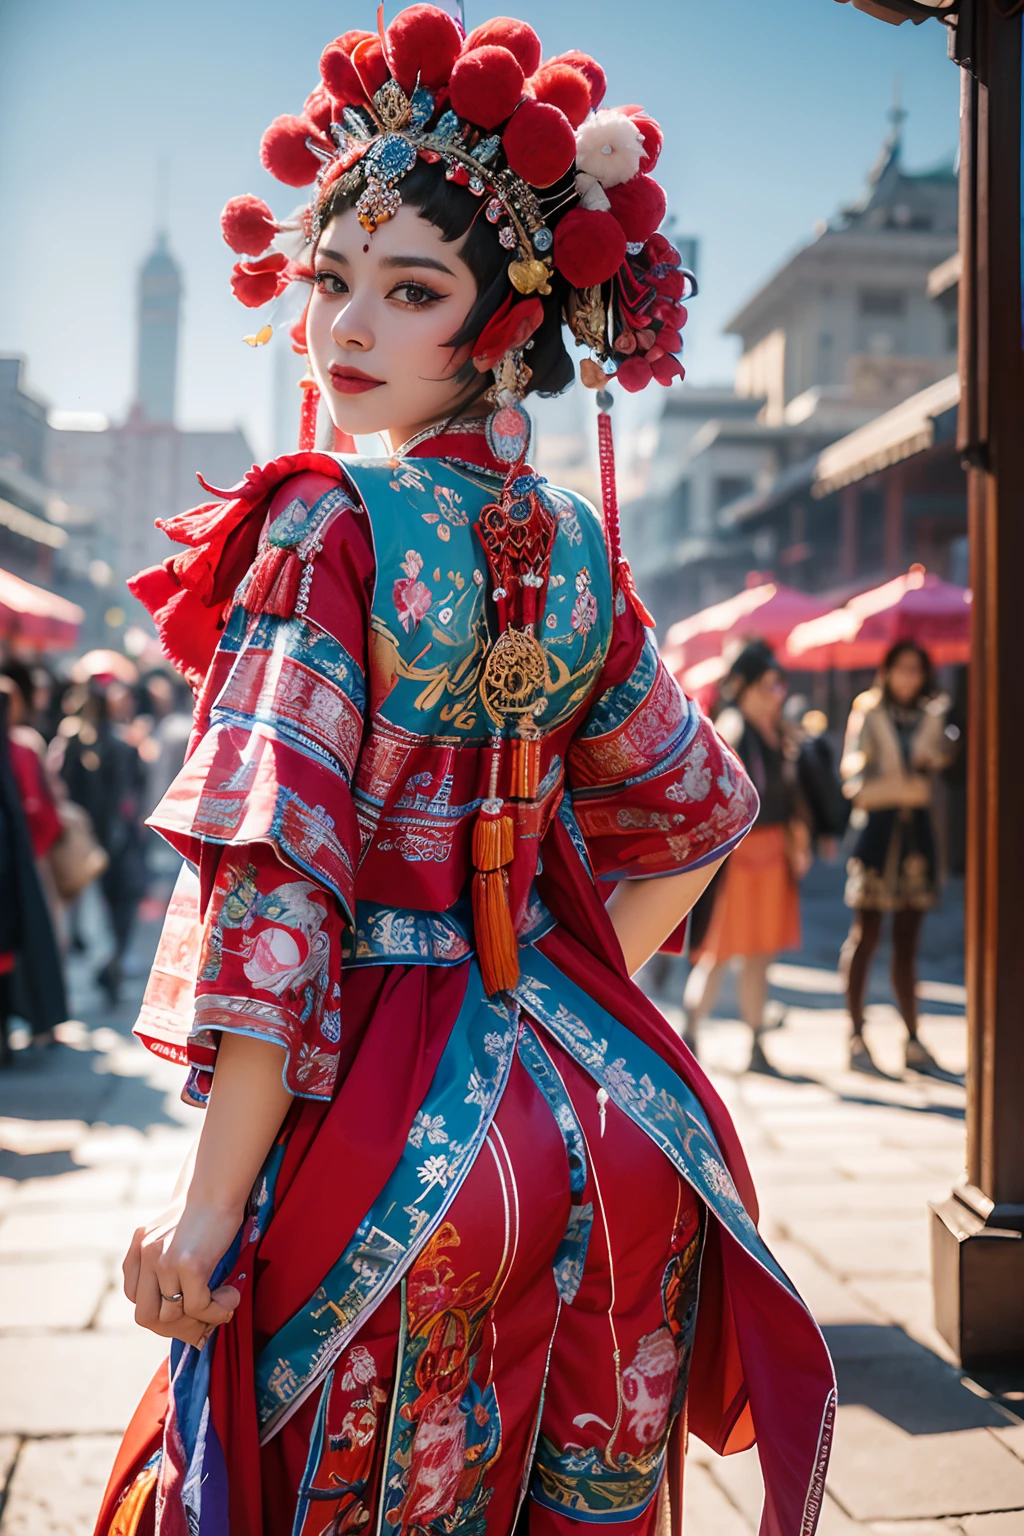 8K，RAW photos，best qualtiy，tmasterpiece，realisticlying，photograph realistic，ultra - detailed， 1 girl， CNOperaCrown，solo，sportrait， Peking Opera costumes，looking at viewert， ssmile， From the front， putting makeup on， head gear， （（（CNOperaFlag）））， The flag is from behind， Take it， The upper part of the body， nipple tassels，（Daumadan：1.4），Stage background，